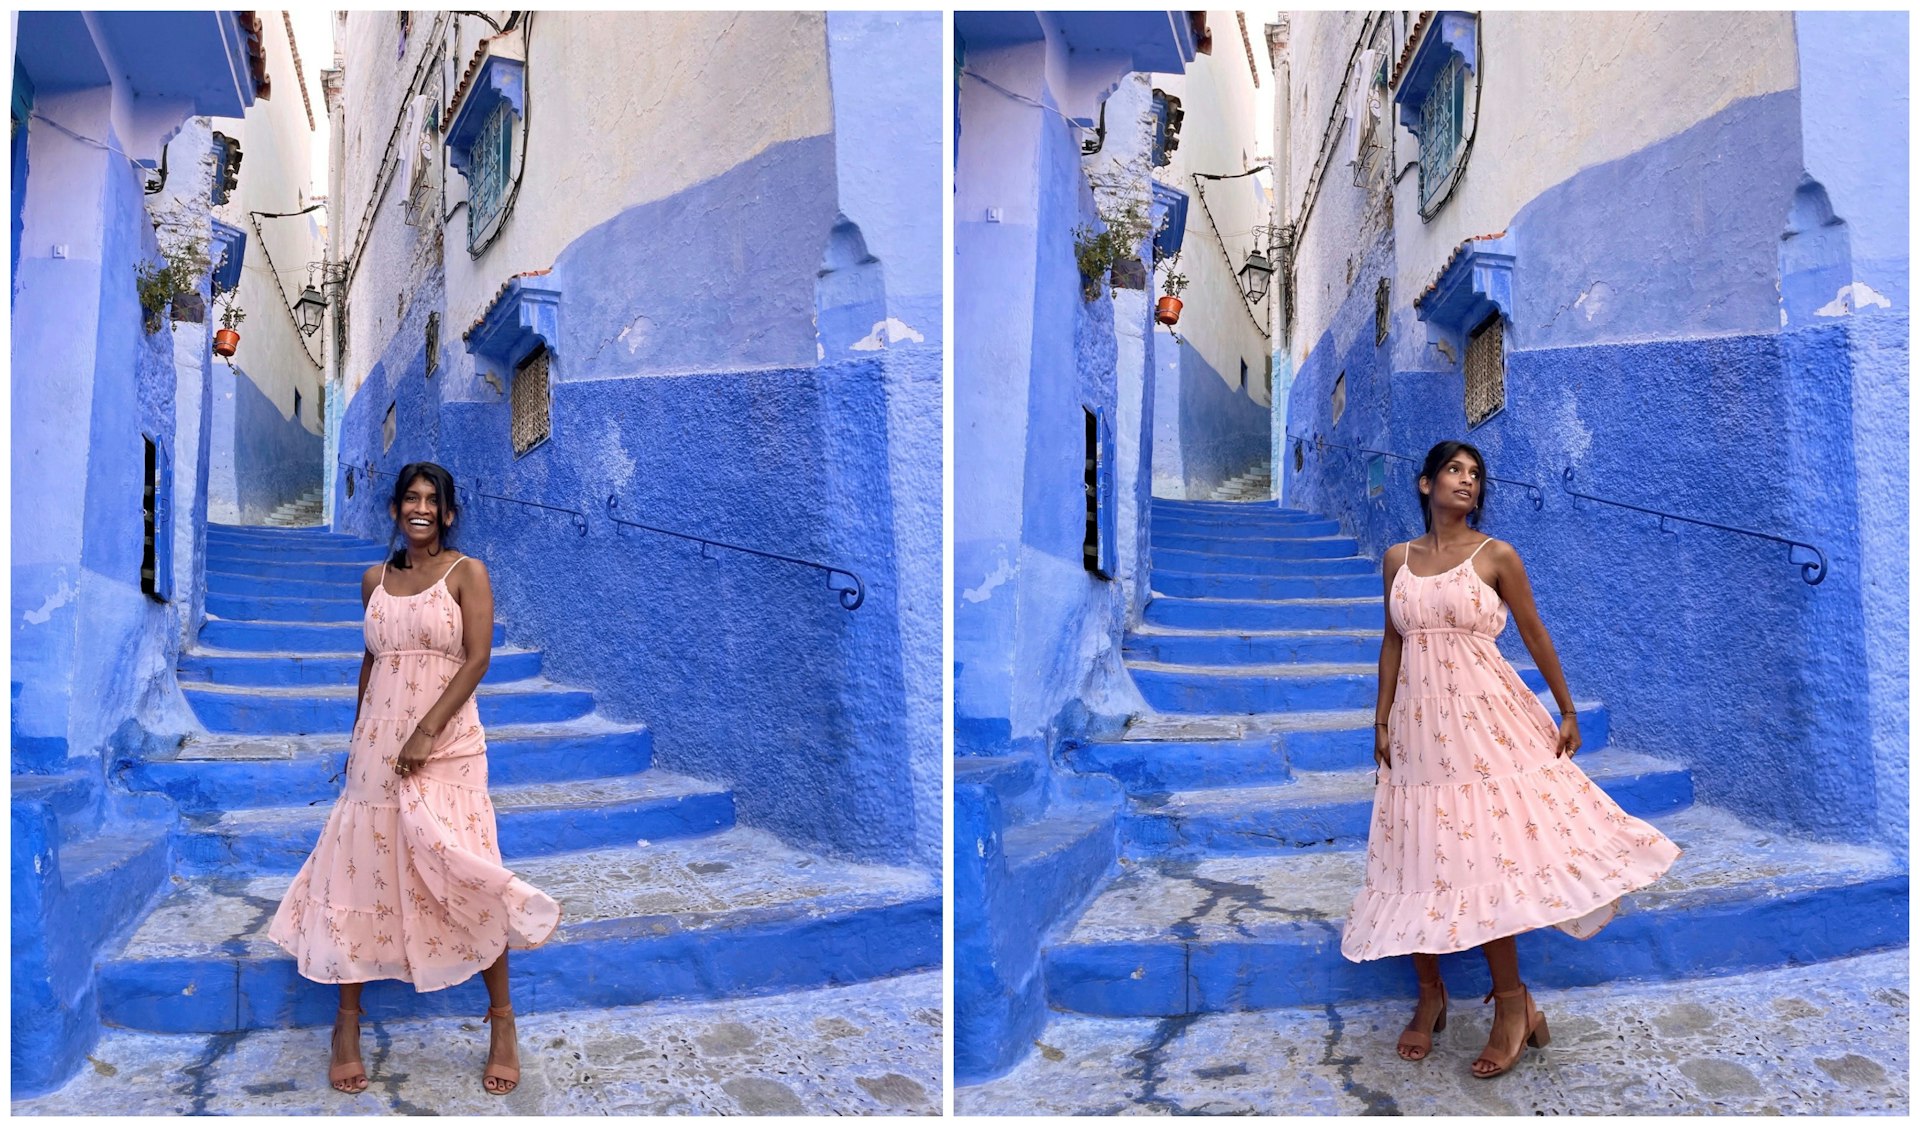 Lonely Planet's Deepa Lakshmin poses in a pink dress against the blue walls of Morocco's Chefchaouen